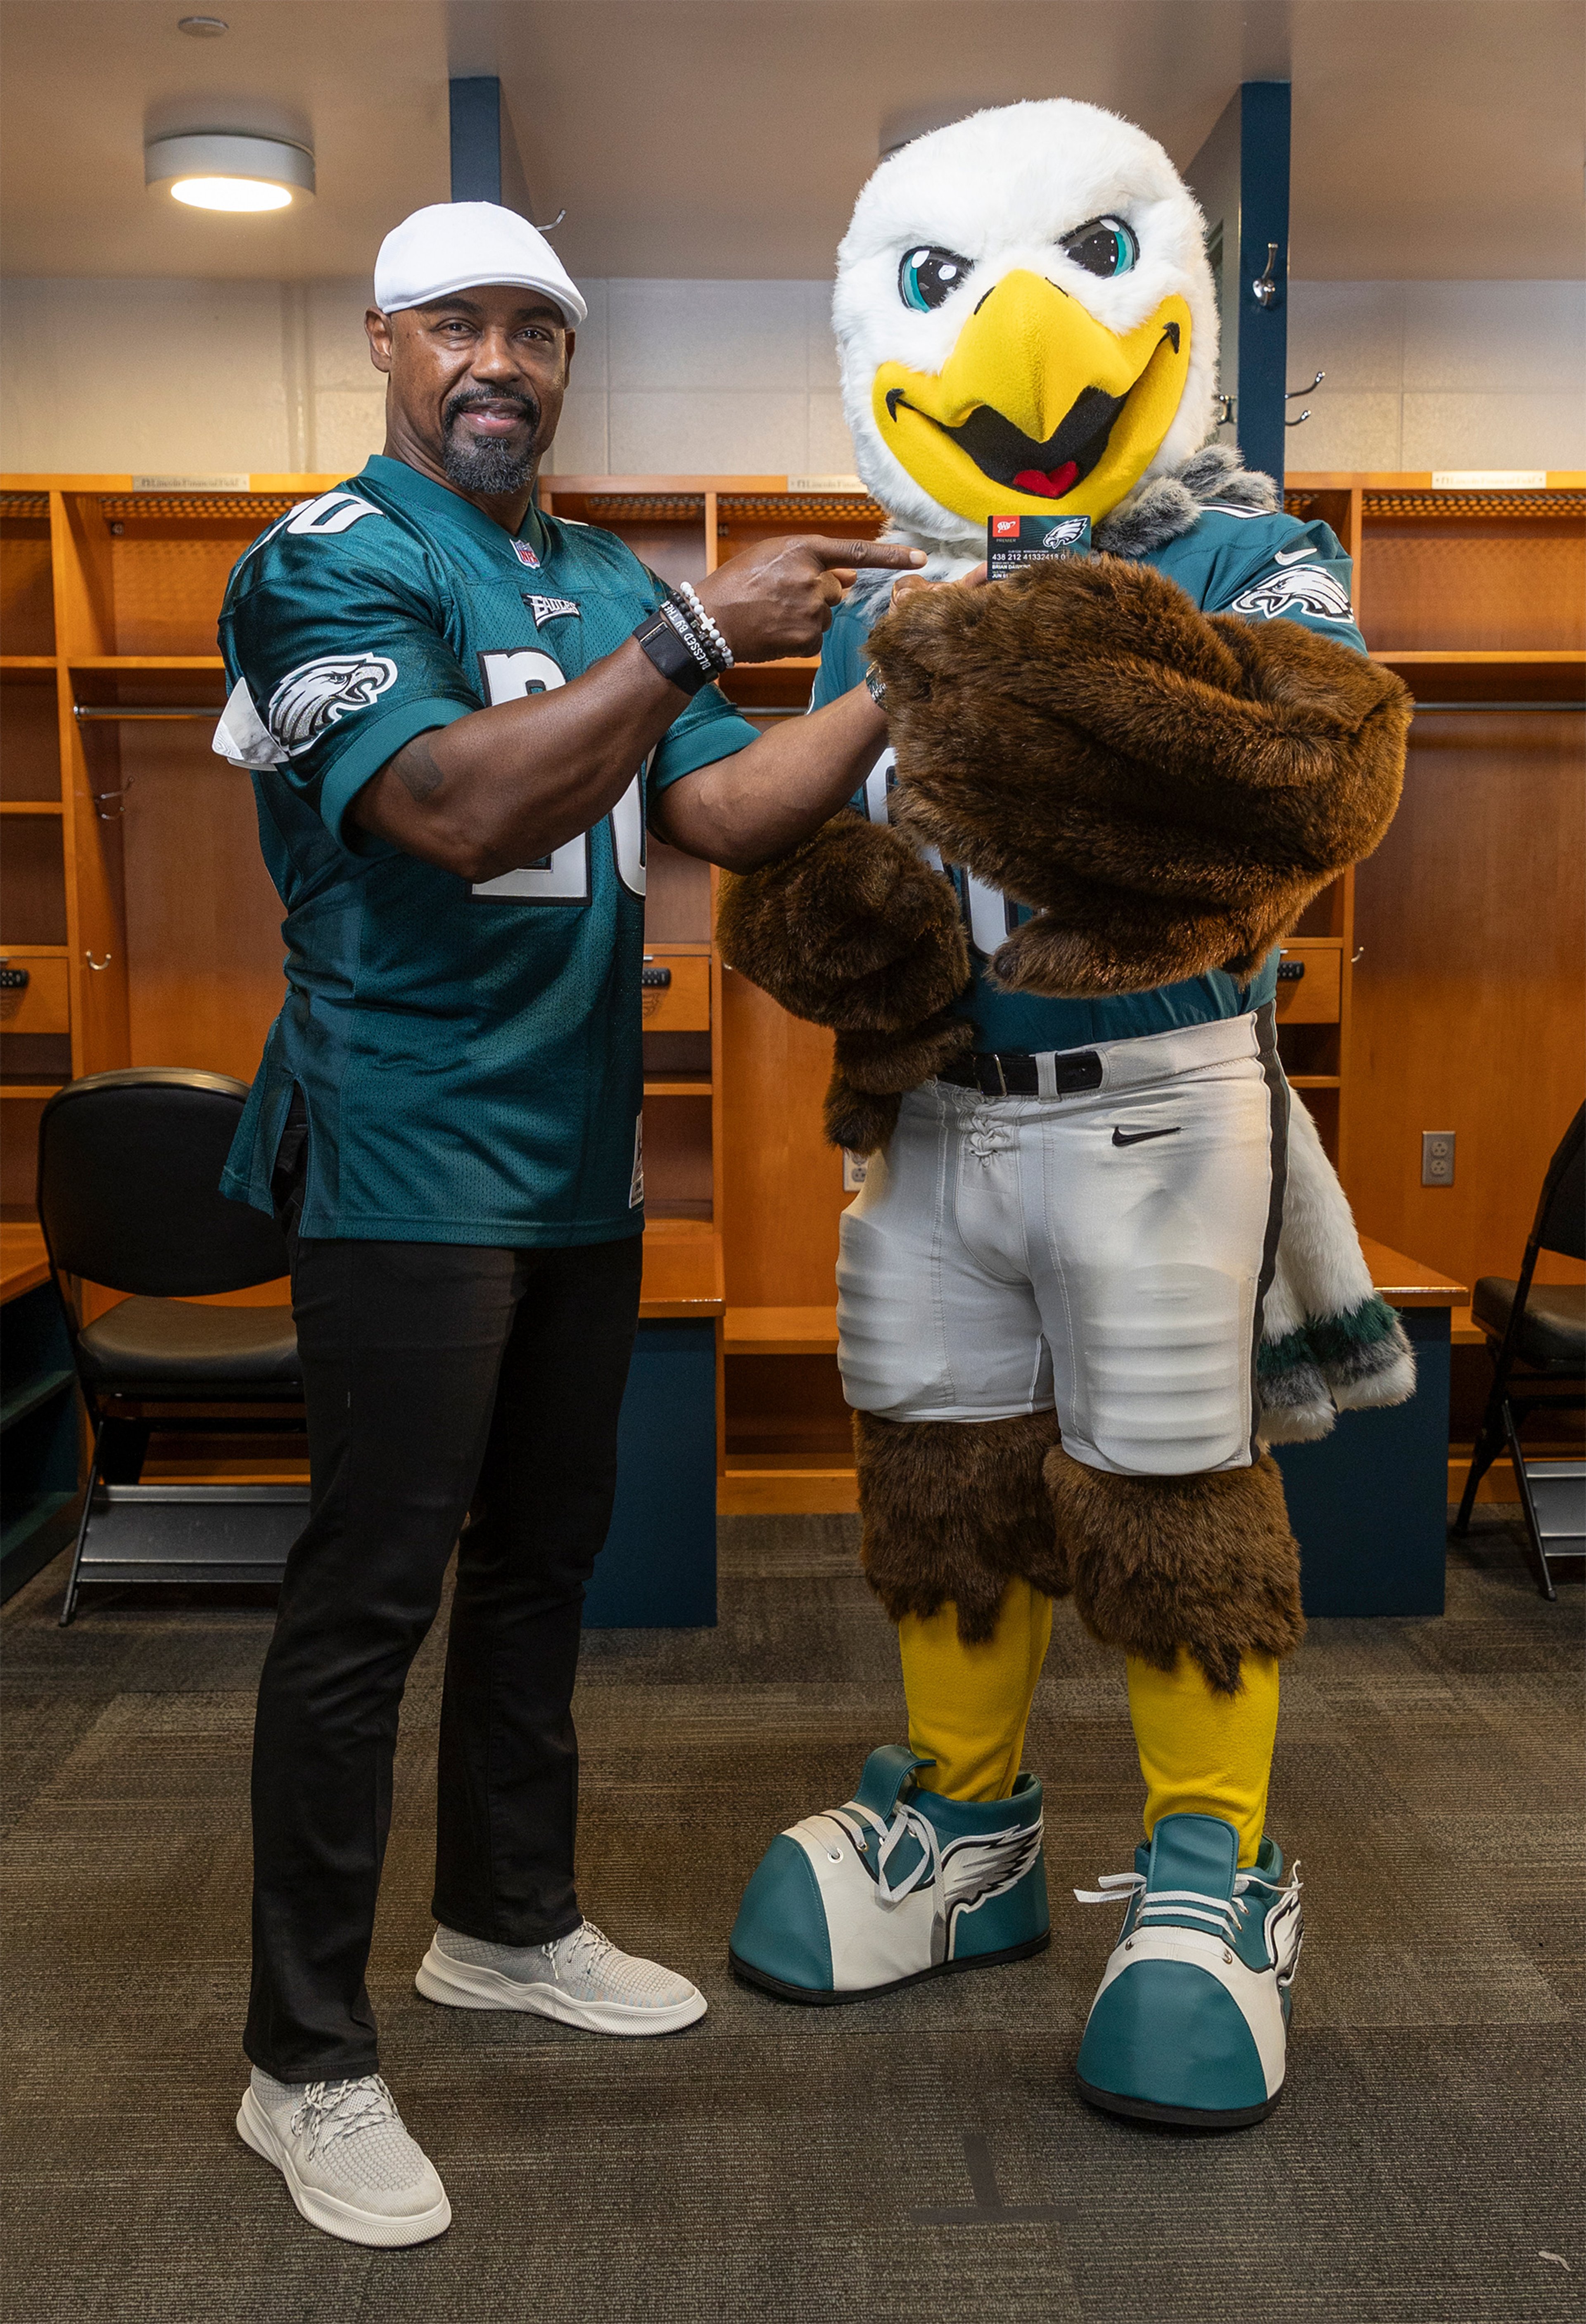 Philadelphia Eagles legend Brian Dawkins pointing at Eagles mascot Swoop holding a AAA Eagles MVP card while standing in Eagles locker room